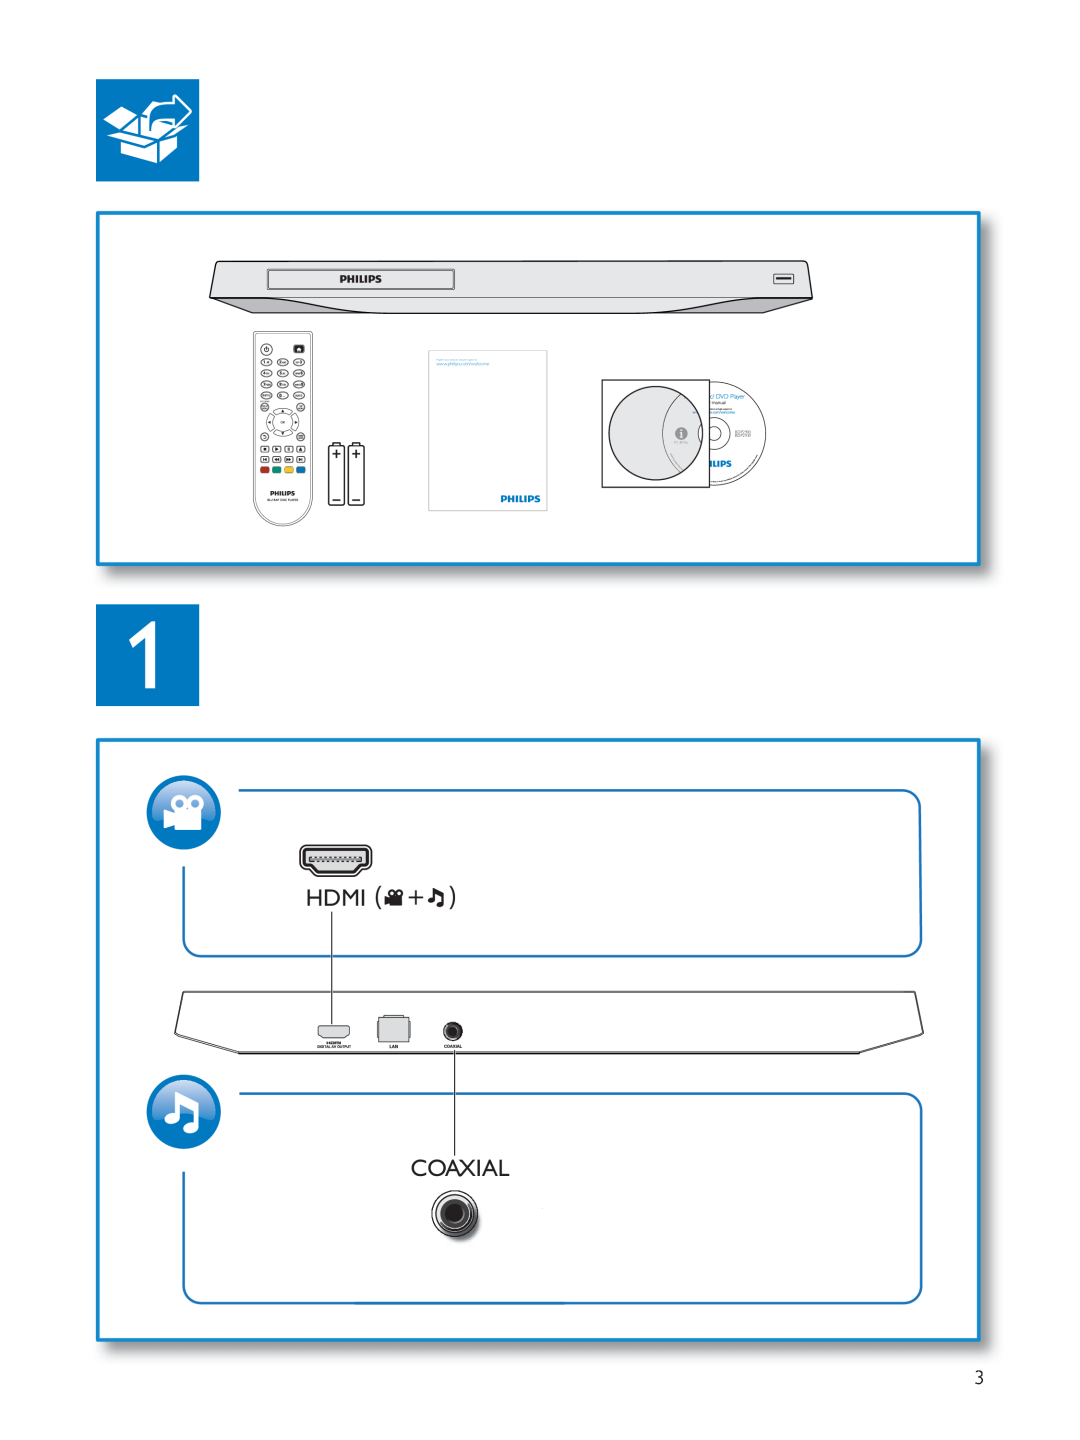 Philips user manual Hdmi Coaxial, BDP2900 BDP2930, Register your product and get support at, Disc Menu, PC & Mac 